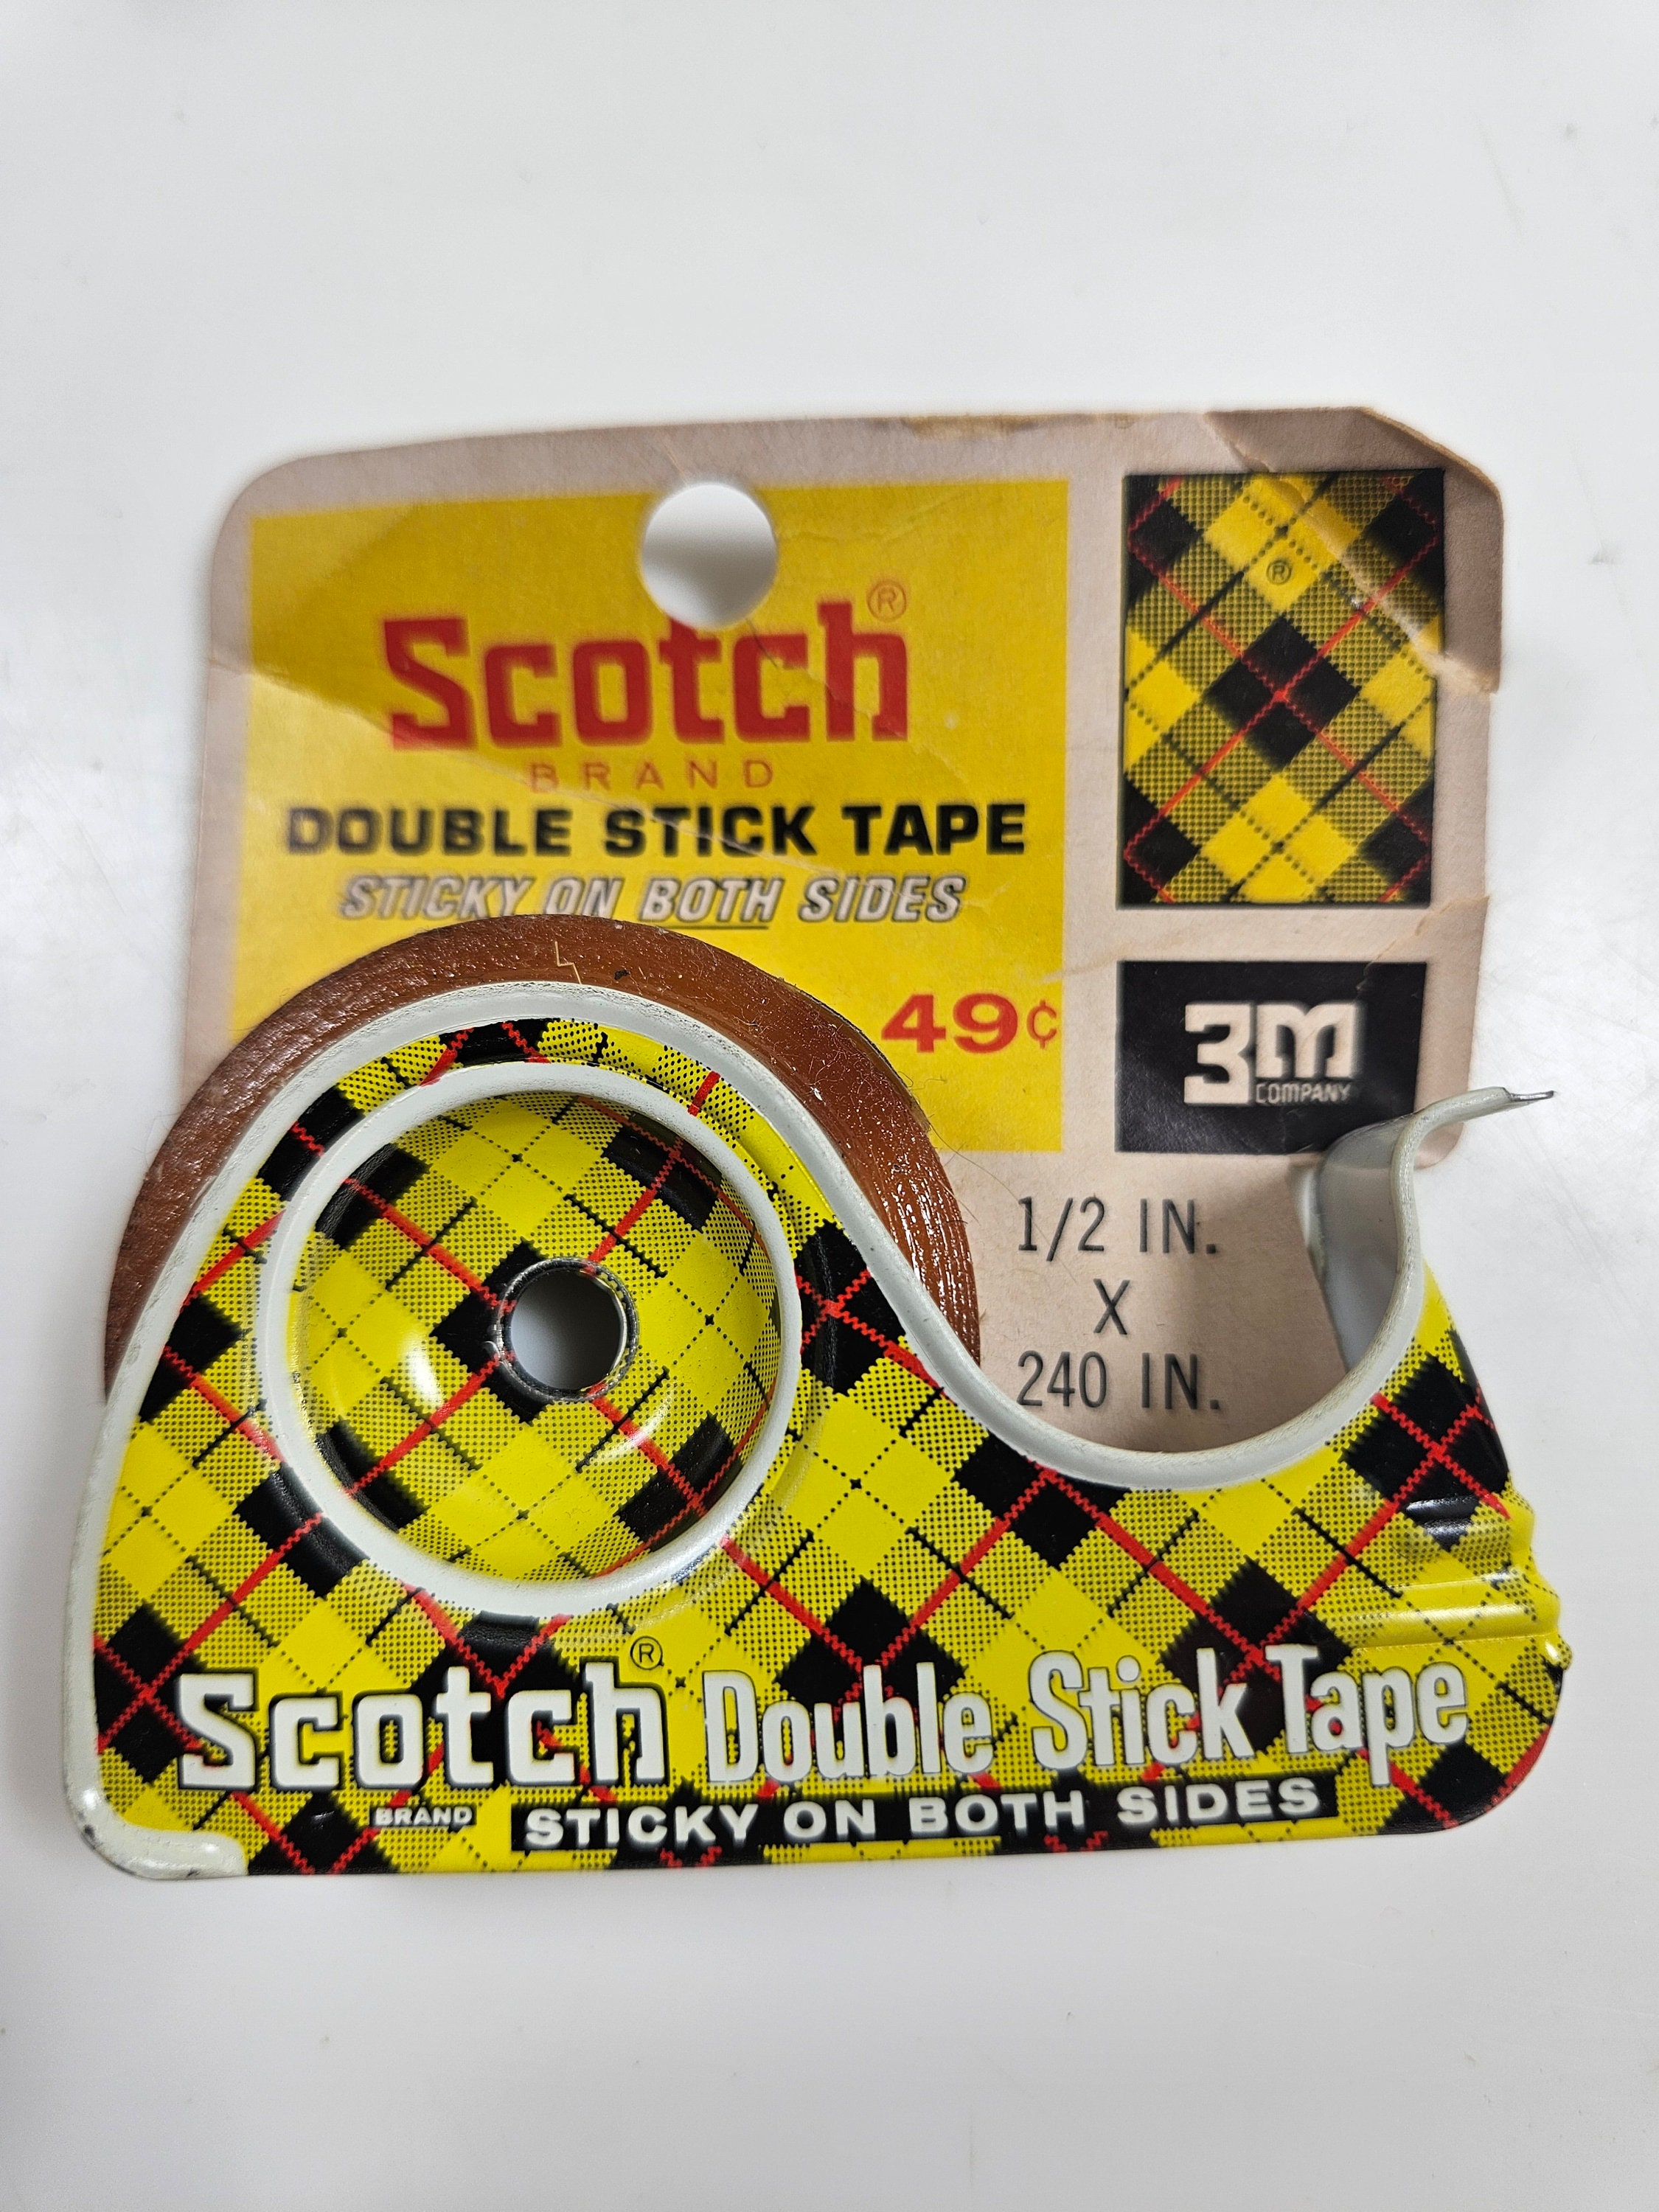 Scotch 3M Refill Rolls of Double-Sided Adhesive Tape, 6.3 mx 12 mm, Pack of  2